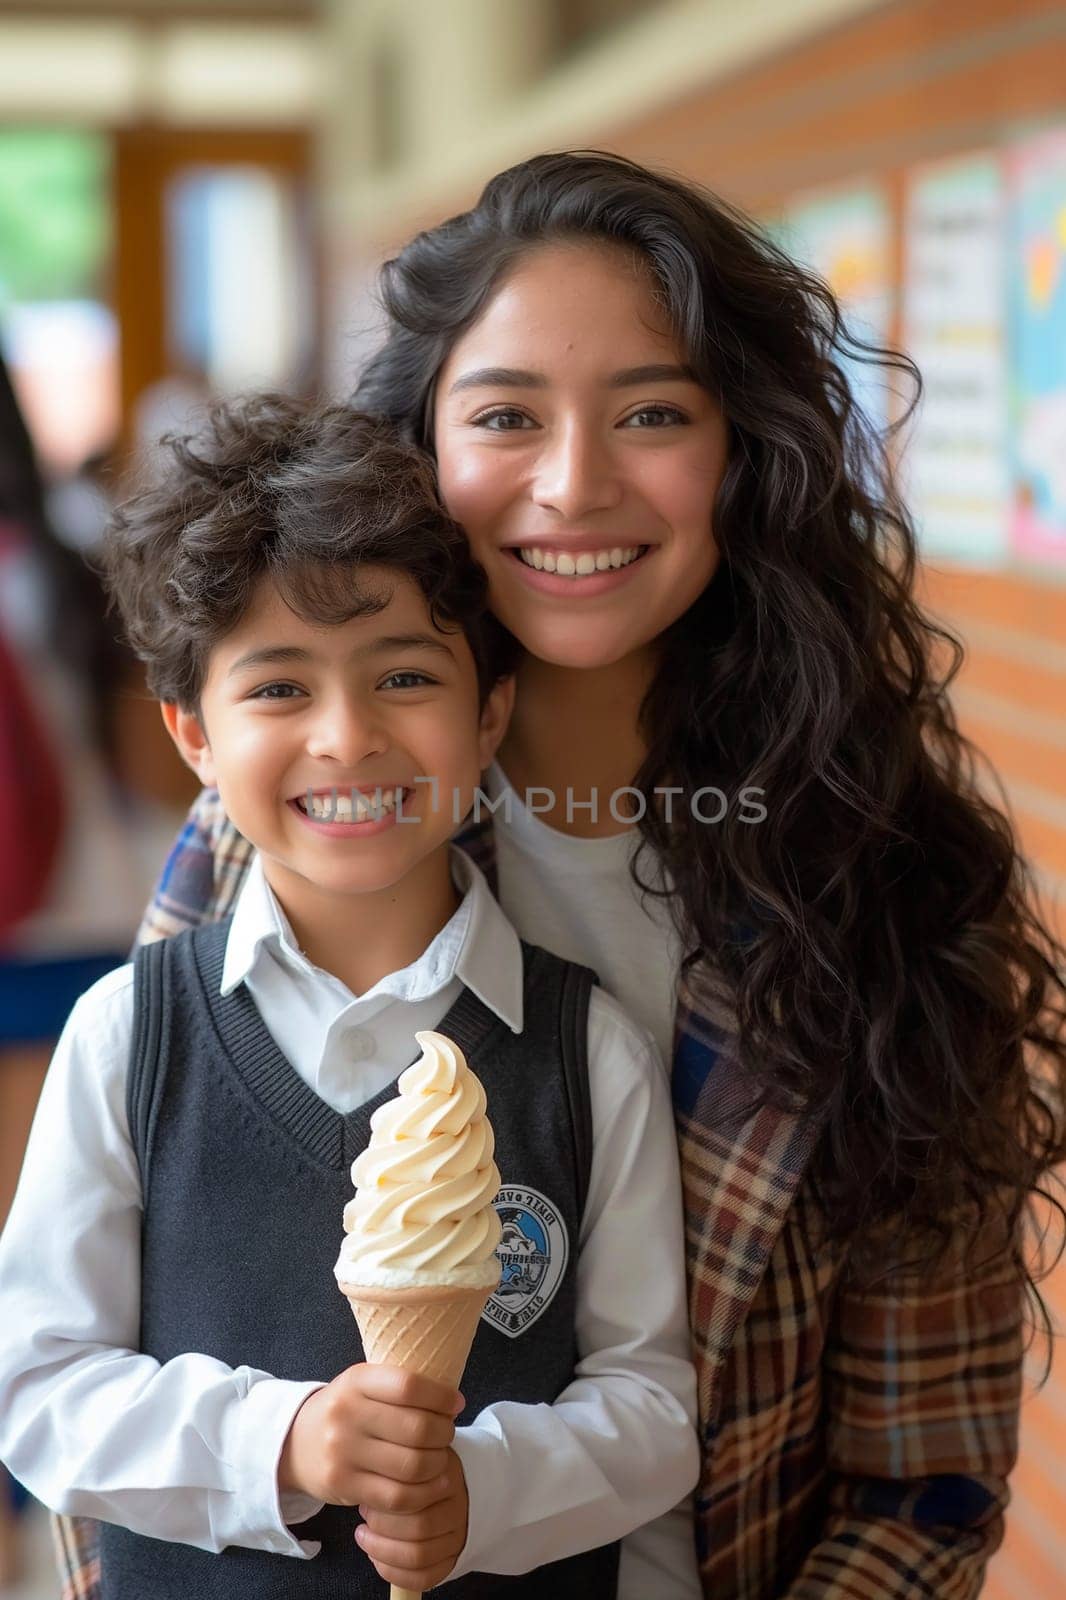 A two children with an ice cream cone